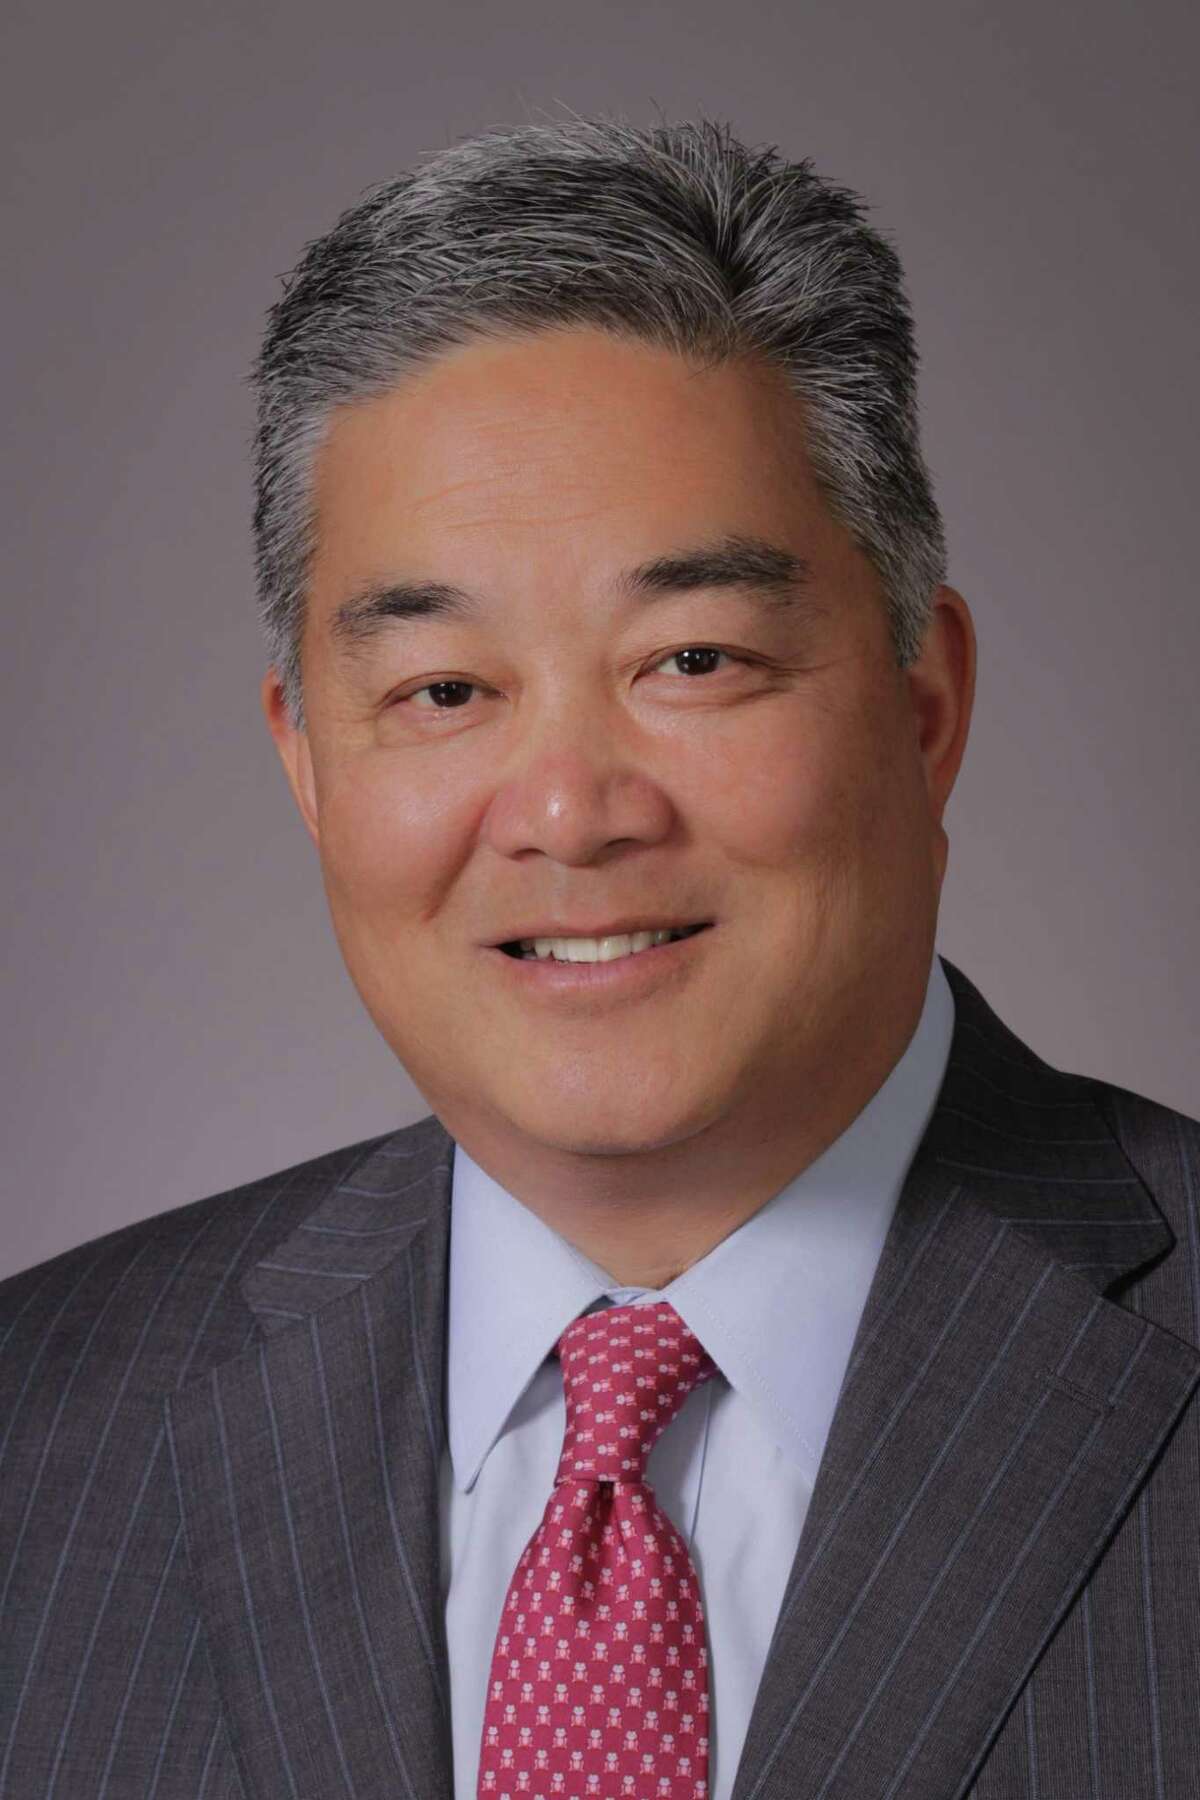 Memorial resident Willie Chiang has been elected the new chair of the United Way of Greater Houston board of trustees.